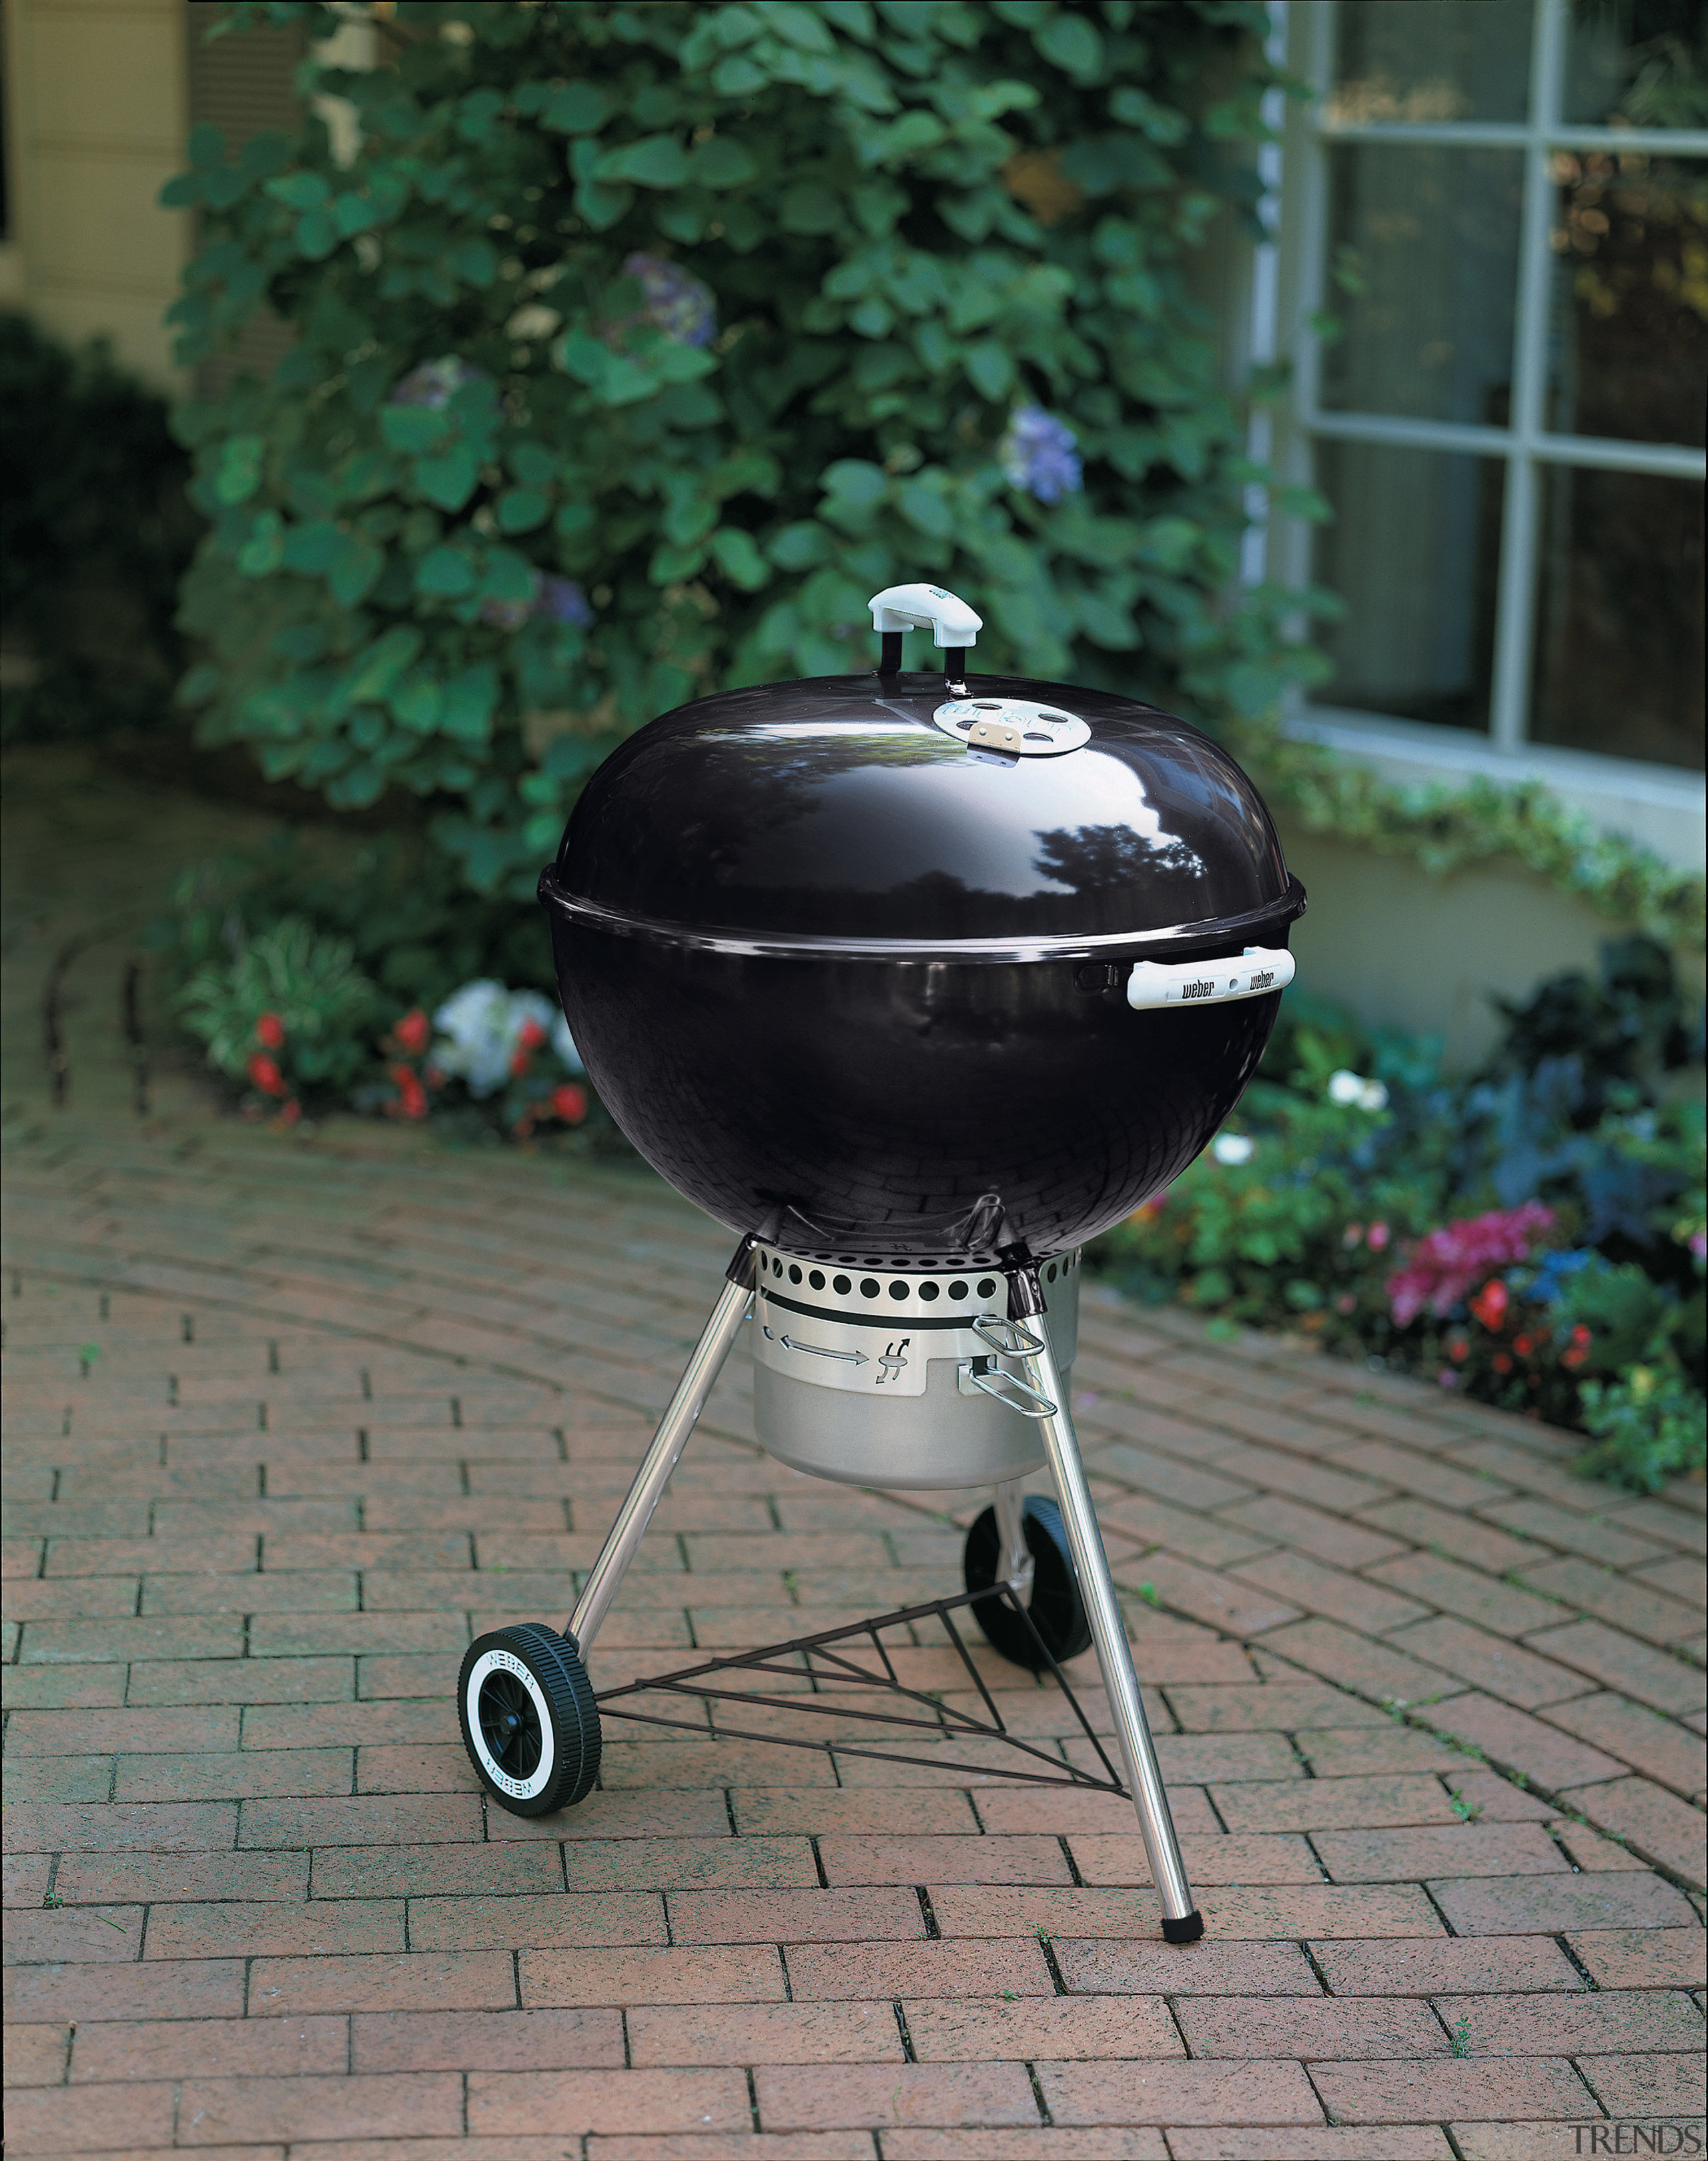 View of a Weber barbeque available from Supreme barbecue, barbecue grill, outdoor grill, outdoor grill rack & topper, product, gray